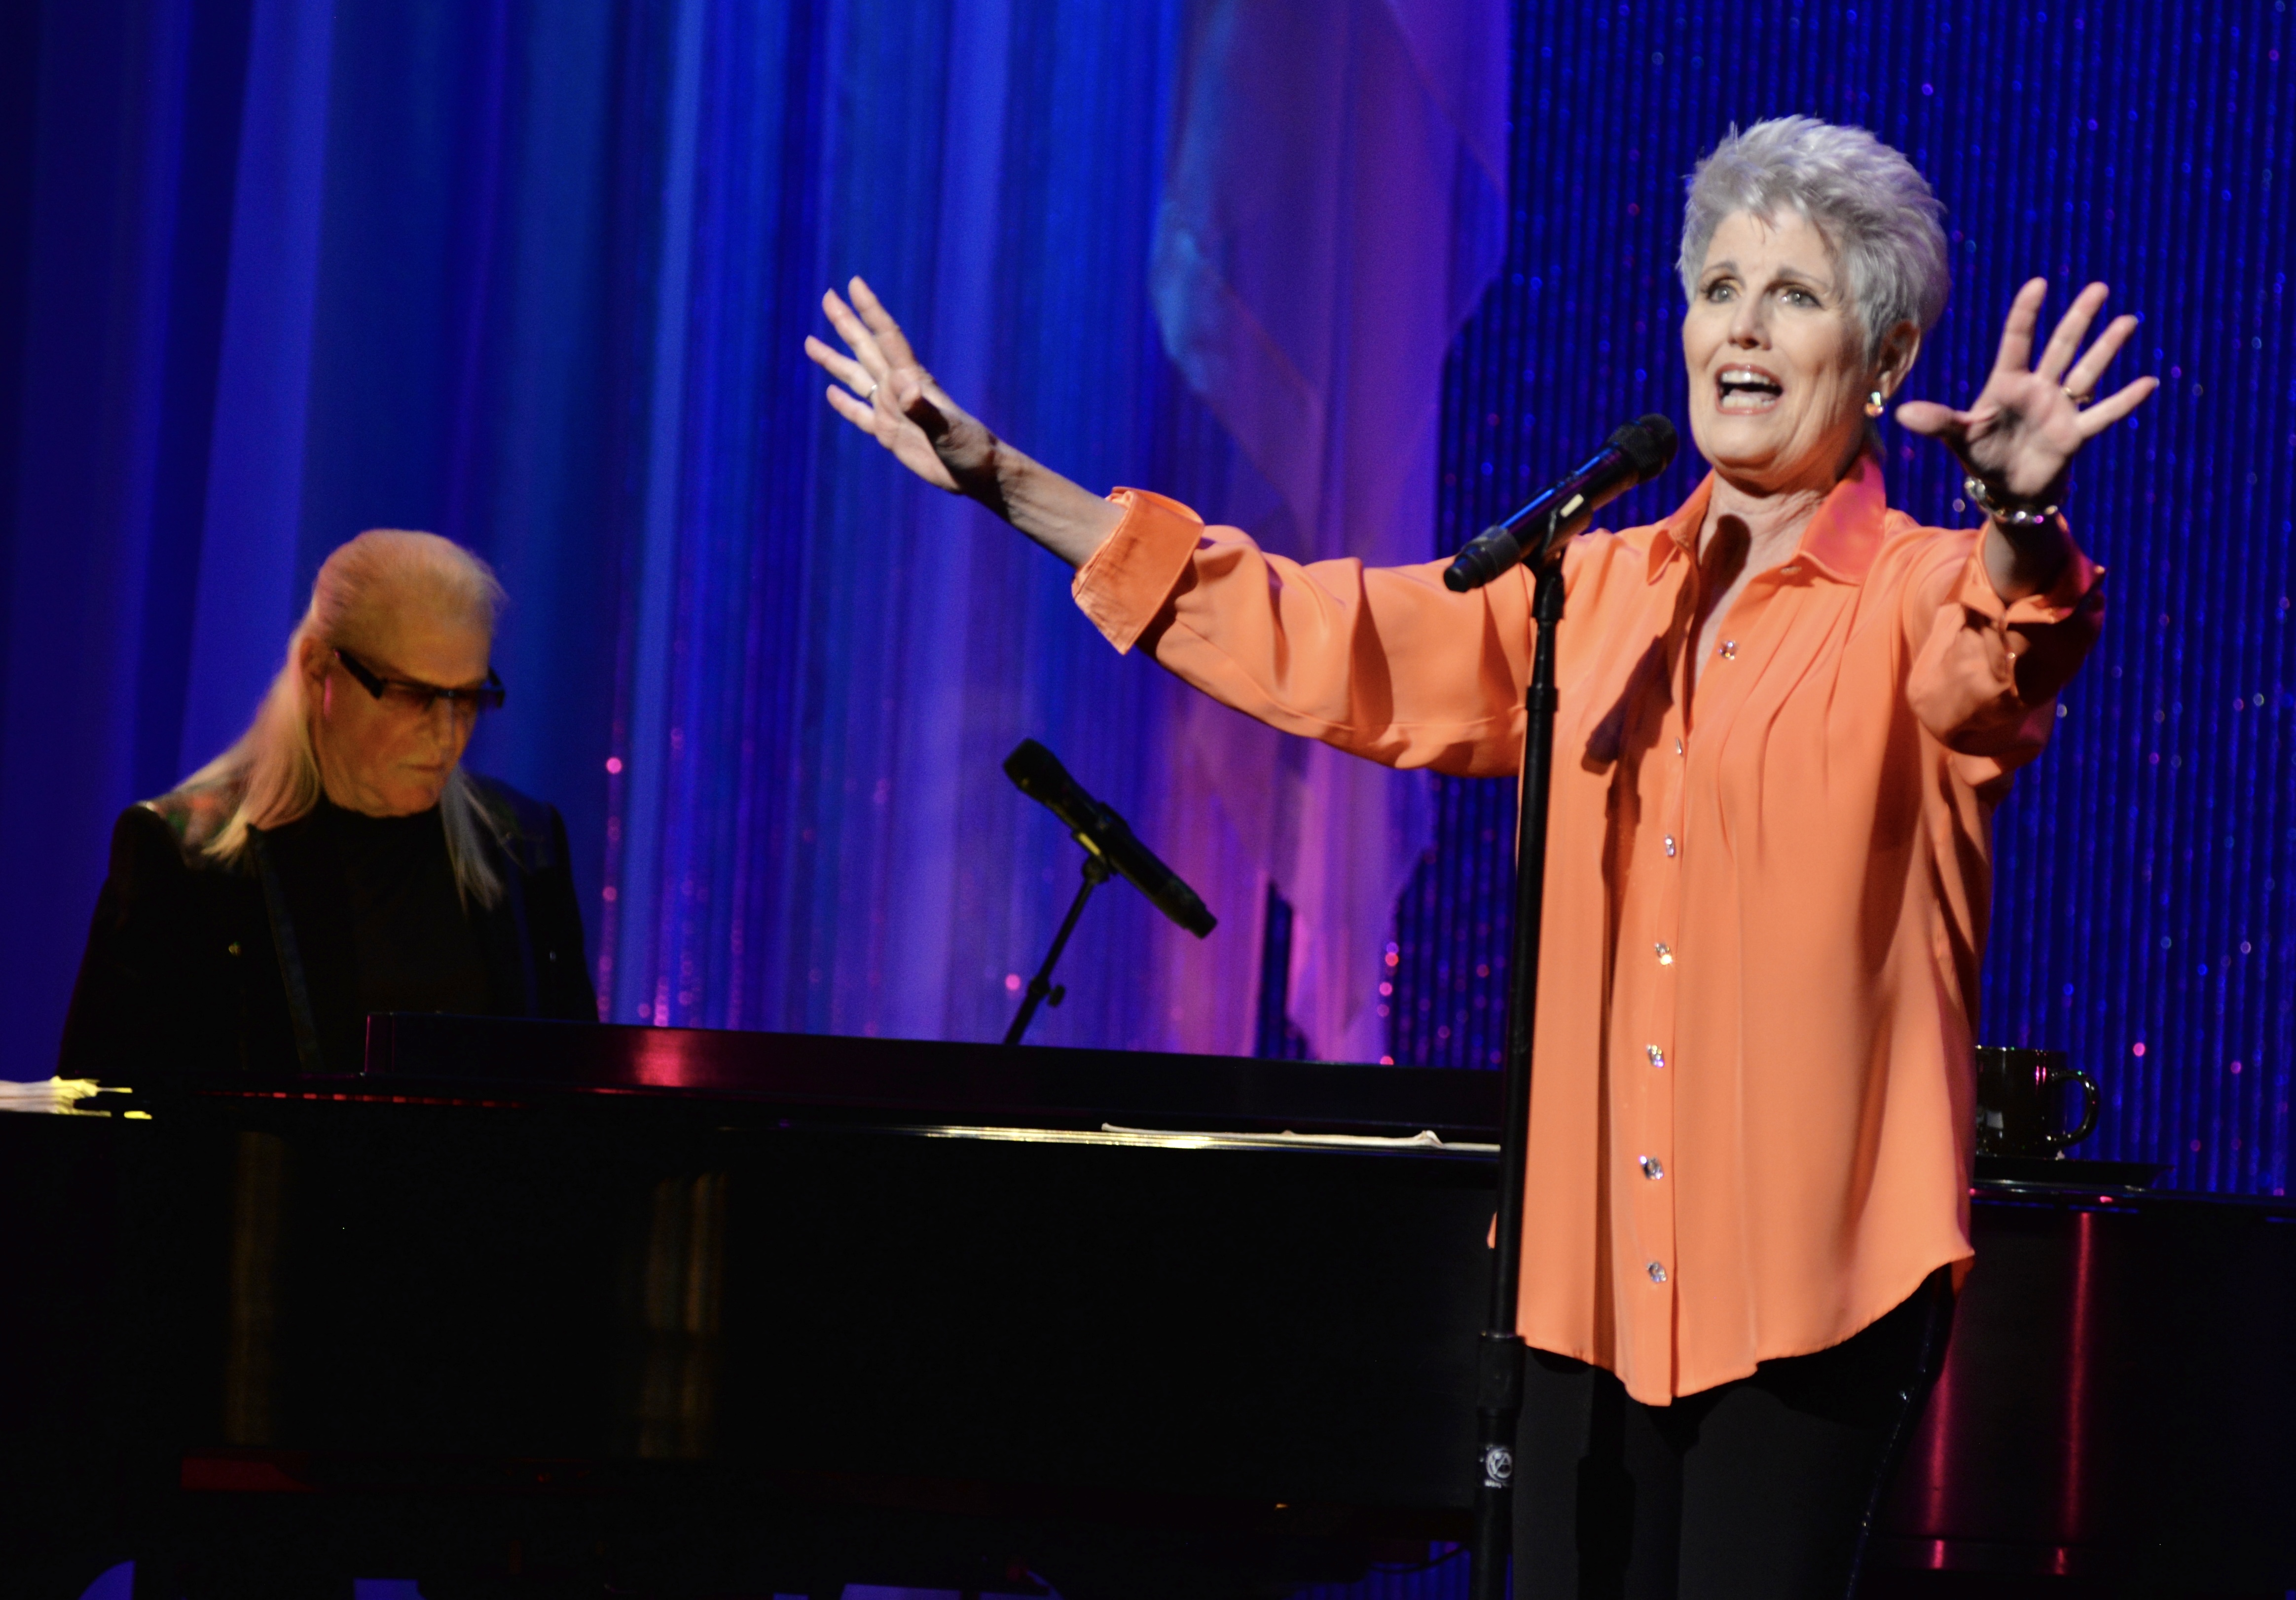 Lucie Arnaz at her "I Got a Job: Song's From My Musical Past" concert at the Aventura Arts & Cultural Center on April 10, 2022 in Aventura, Florida | Source: Getty Images